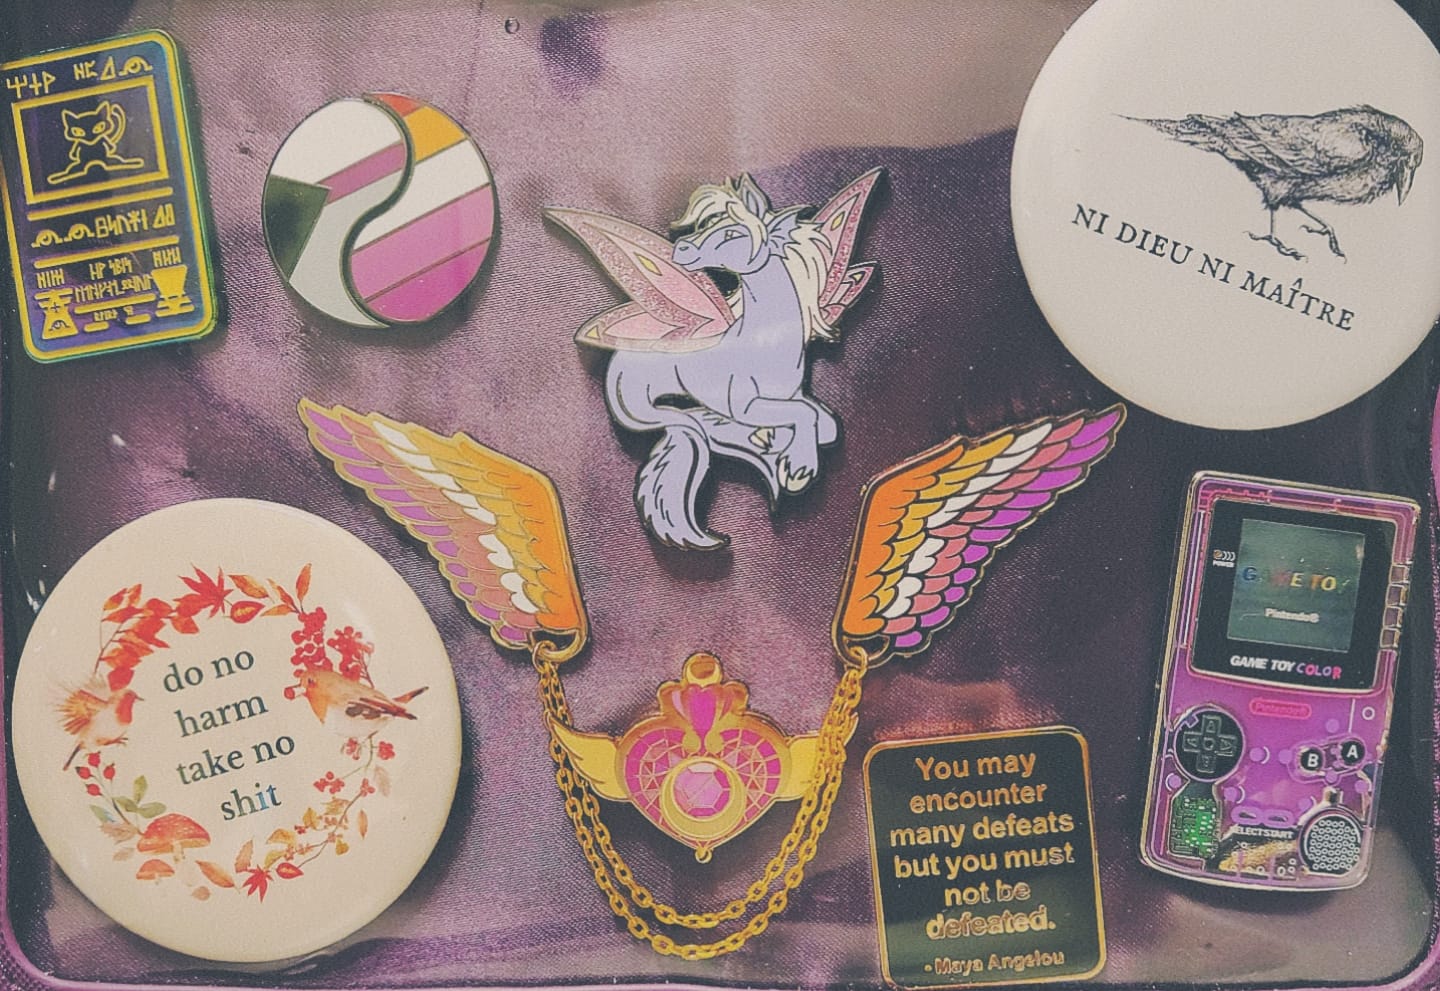 Kyr's ita bag. It is purple and the pin pad has a satin exterior.  Pins include a chrome Mew pin, demisexual and lesbian pride flag yin yang pins, an unconverted Faerie Peopin, a crow captioned 'Ni Dieu Ni Maître', the quote 'do no harm take no shit' inside an autumn colored wreath with two small robin birds and mushrooms, lesbian pride themed angel wings, a Crisis Moon Compact, the quote 'You may encounter many defeats but you must not be defeated' by Maya Angelou, and a translucent purple Game Boy Color.